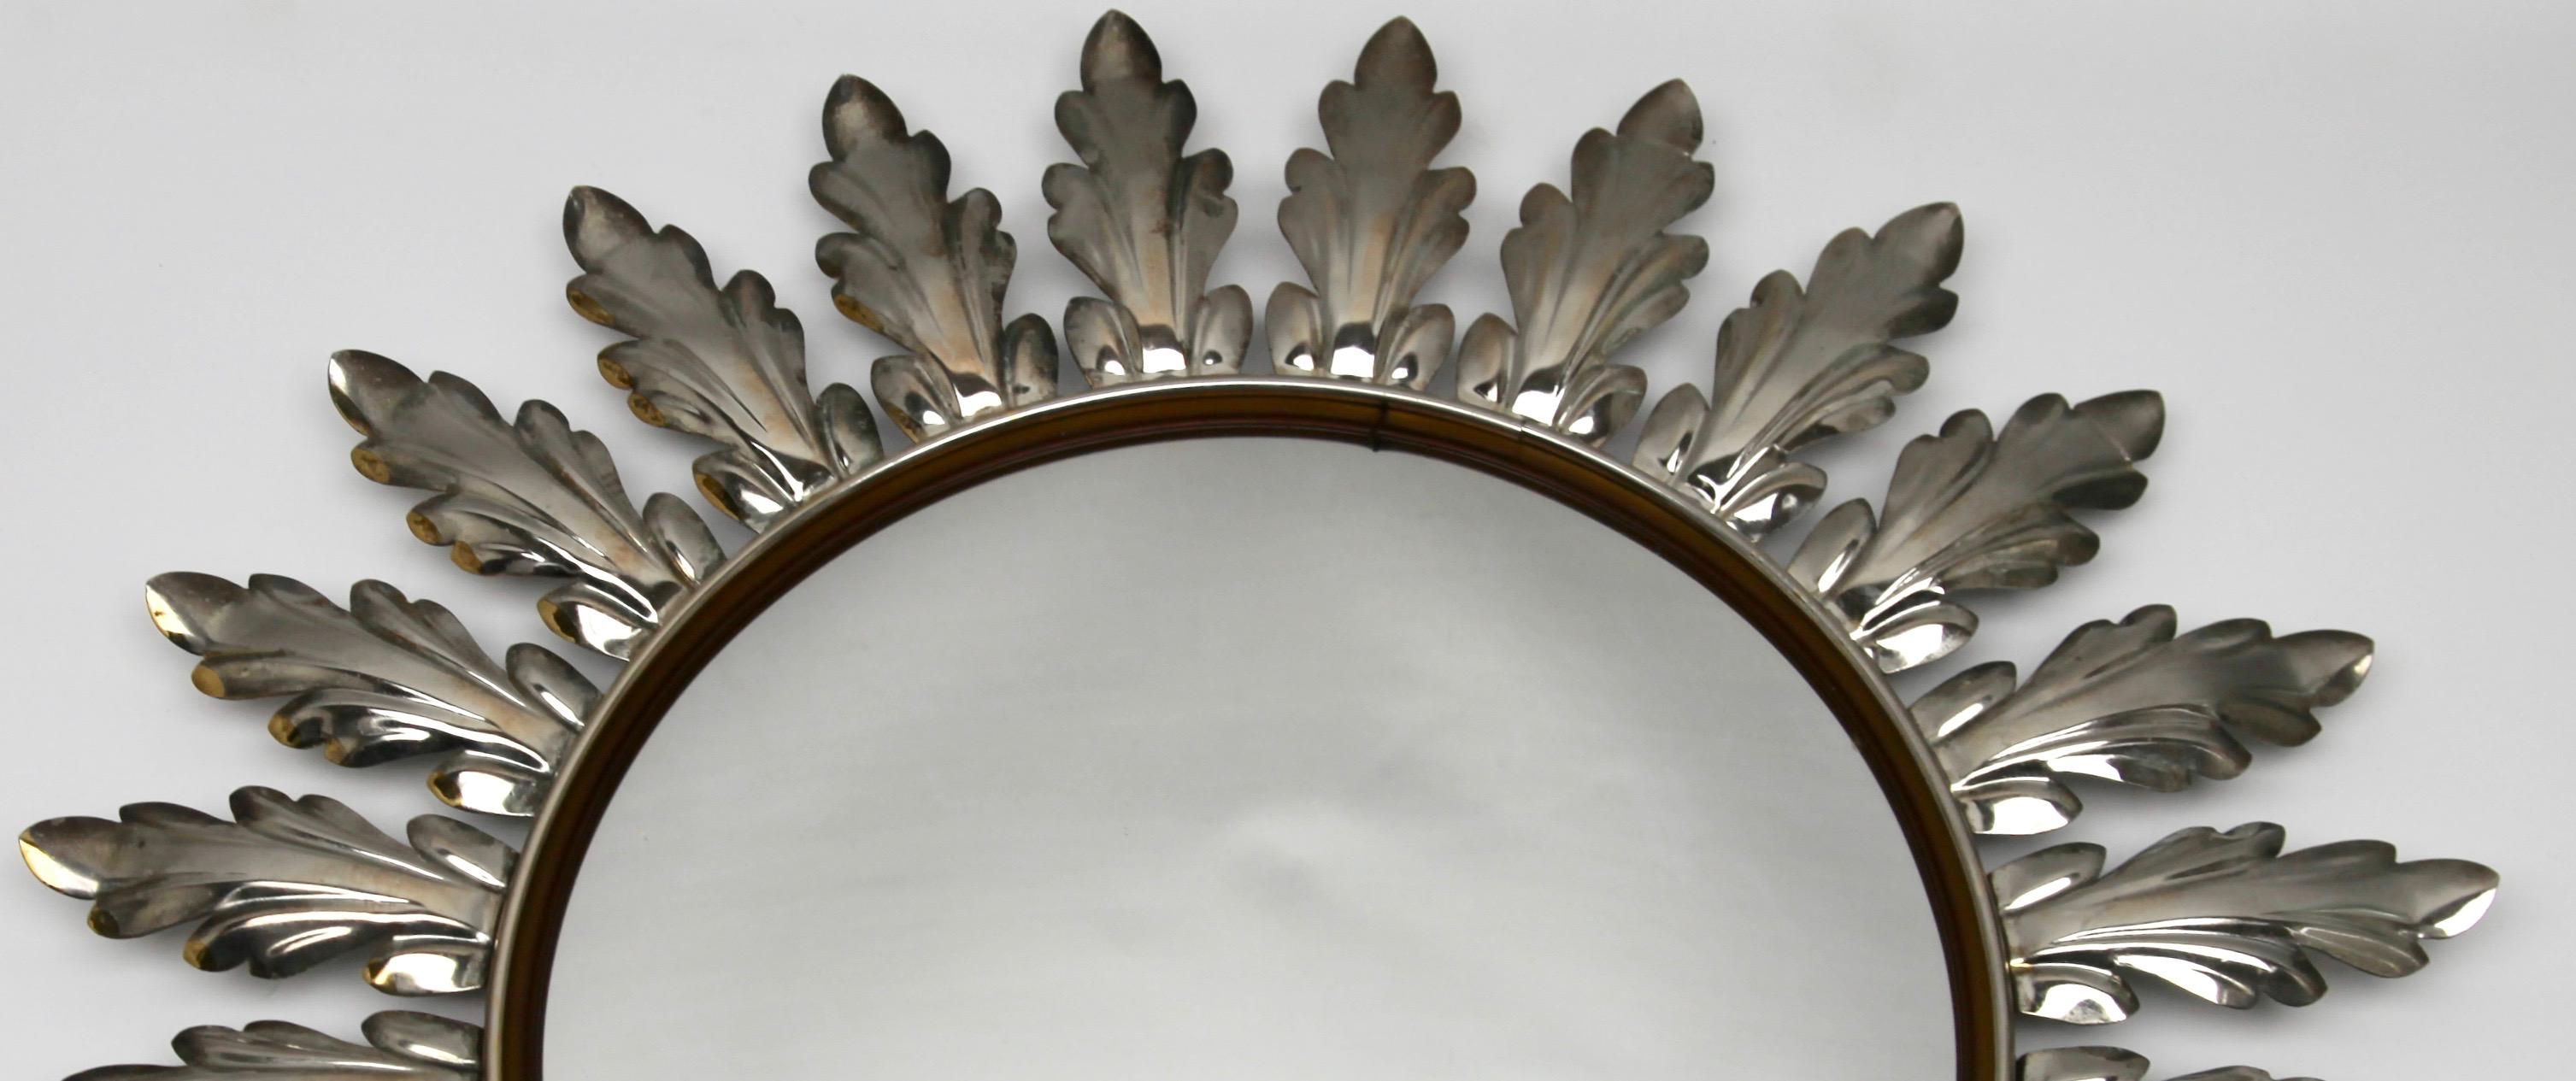 Sunburst mirror with convex mirror made by factory Deknudt in, Belgium
This lovely mirror has a beautiful aged patina according to its age and it is
an interesting piece to create a wall decoration
Made from solid brass.
It was made in the mirror